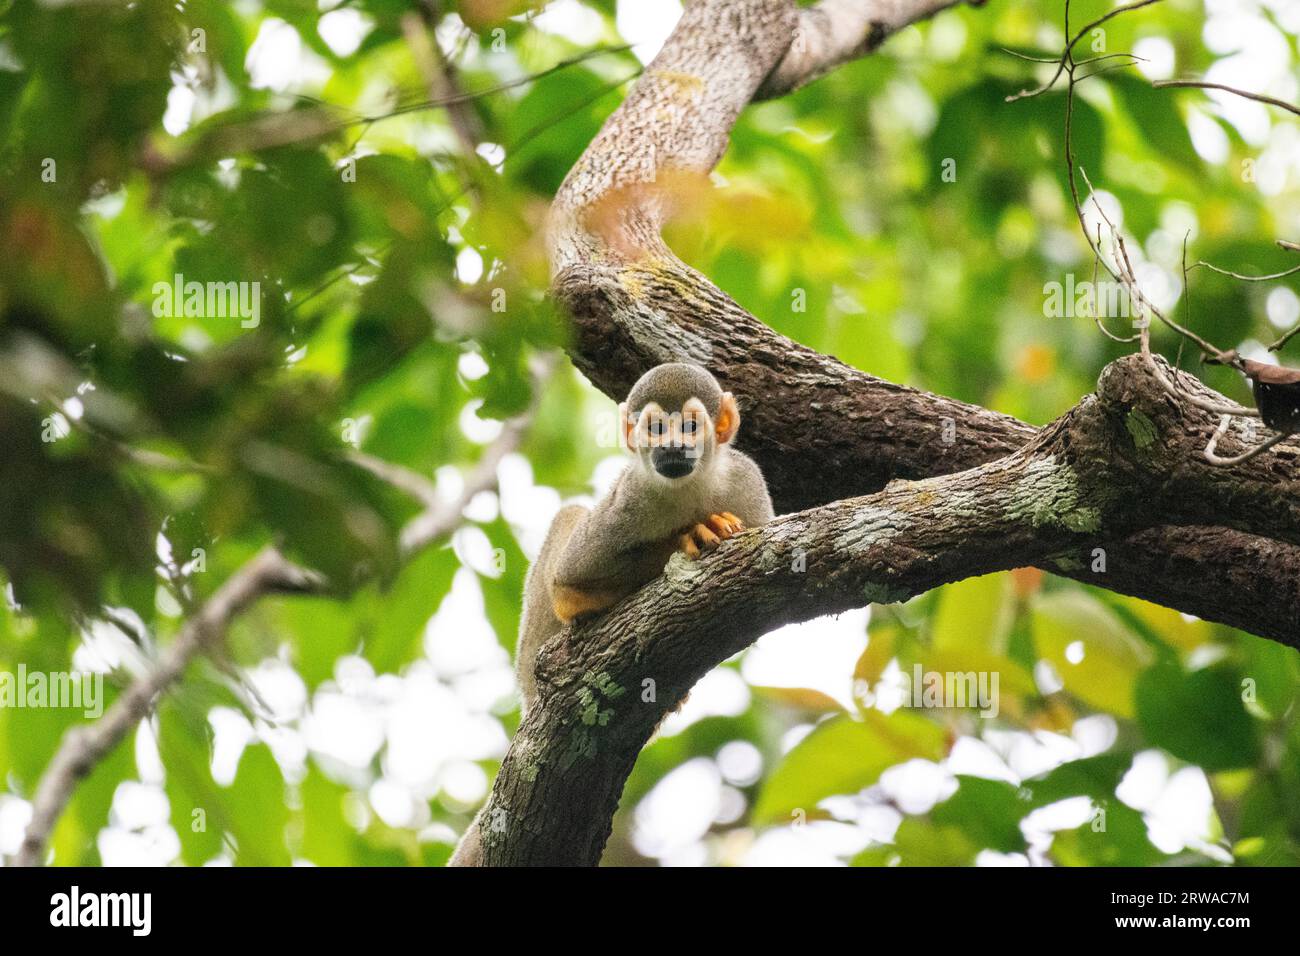 Beautiful view to squirrel monkey on green tree branch in the amazon rainforest, Mato Grosso State, Brazil Stock Photo